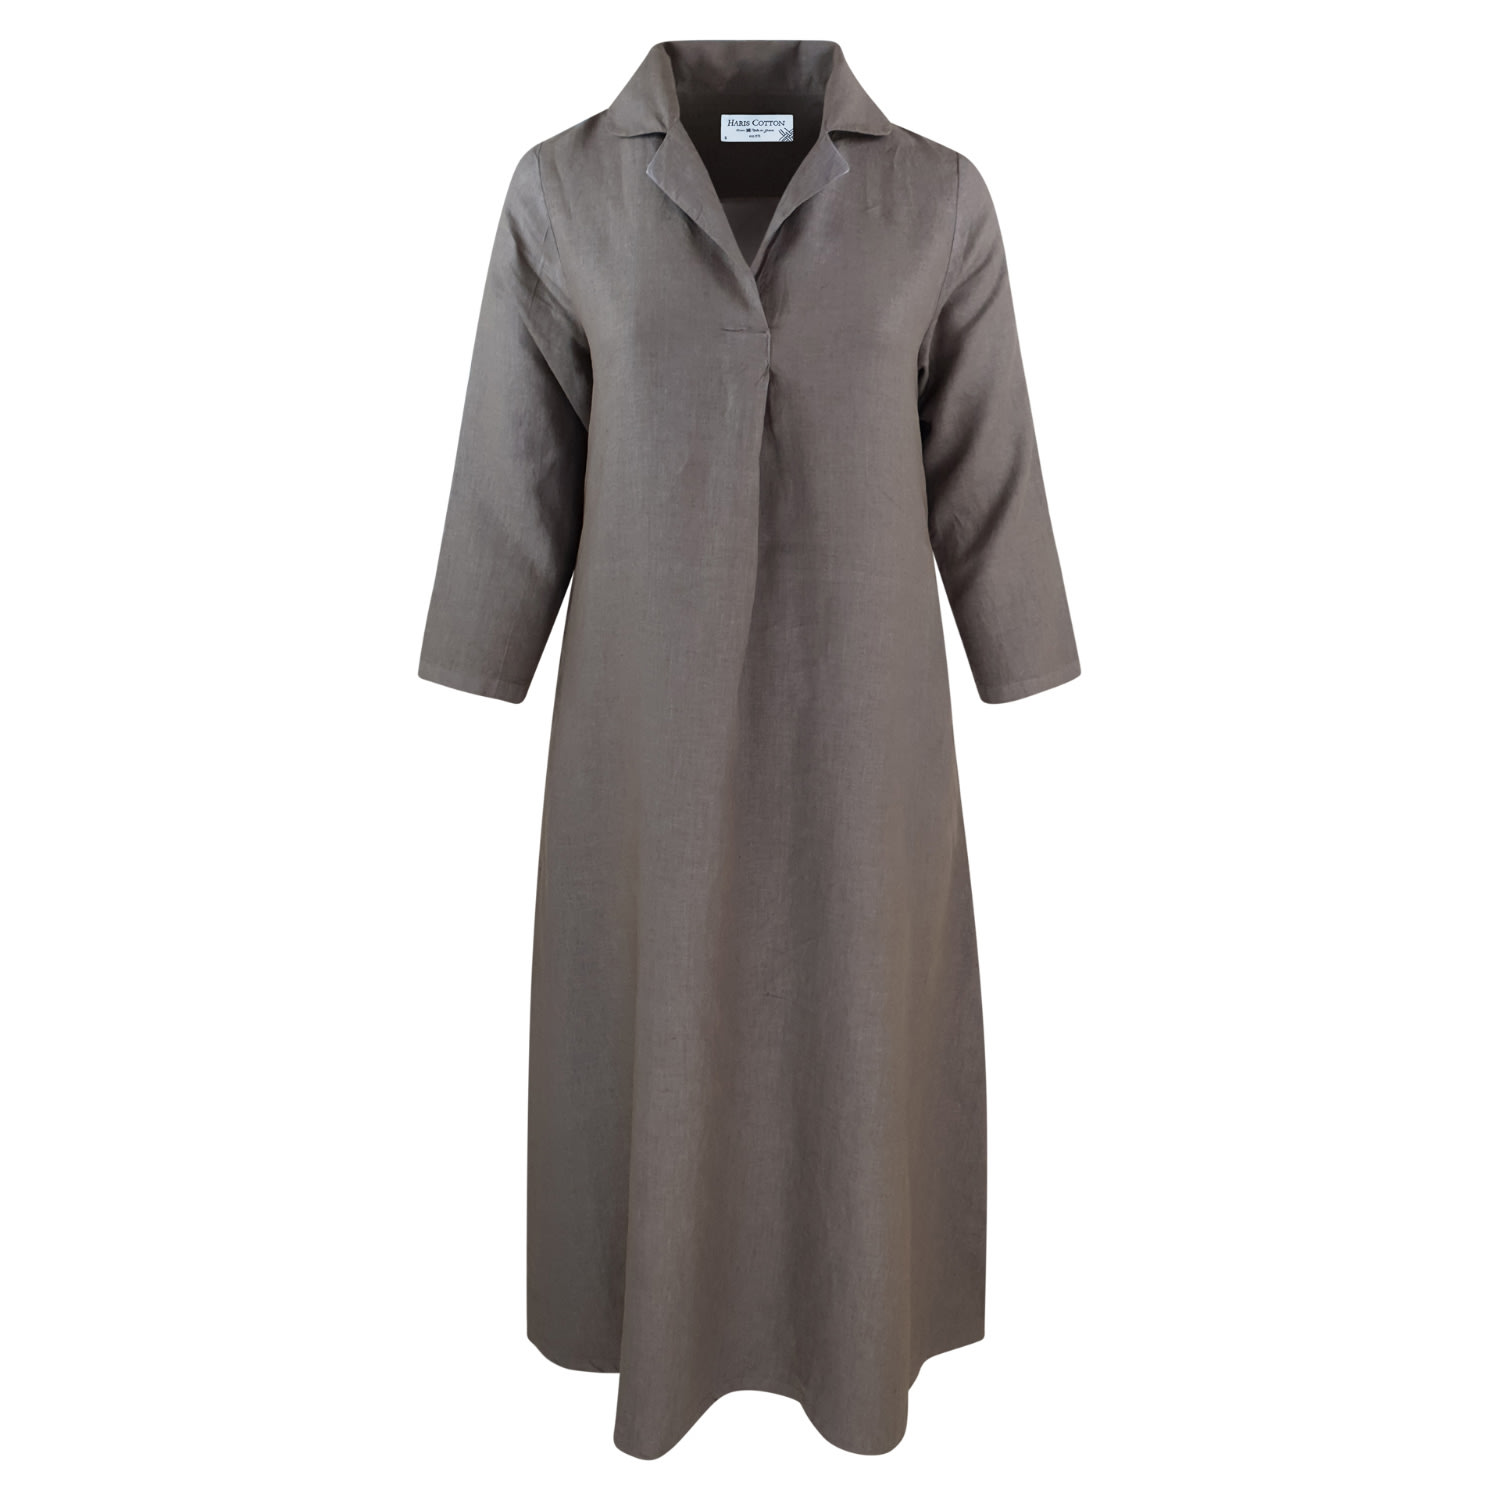 Haris Cotton Women's Brown Maxi Linen Dress With Front Pleat And Lapels - Taupe In Gray